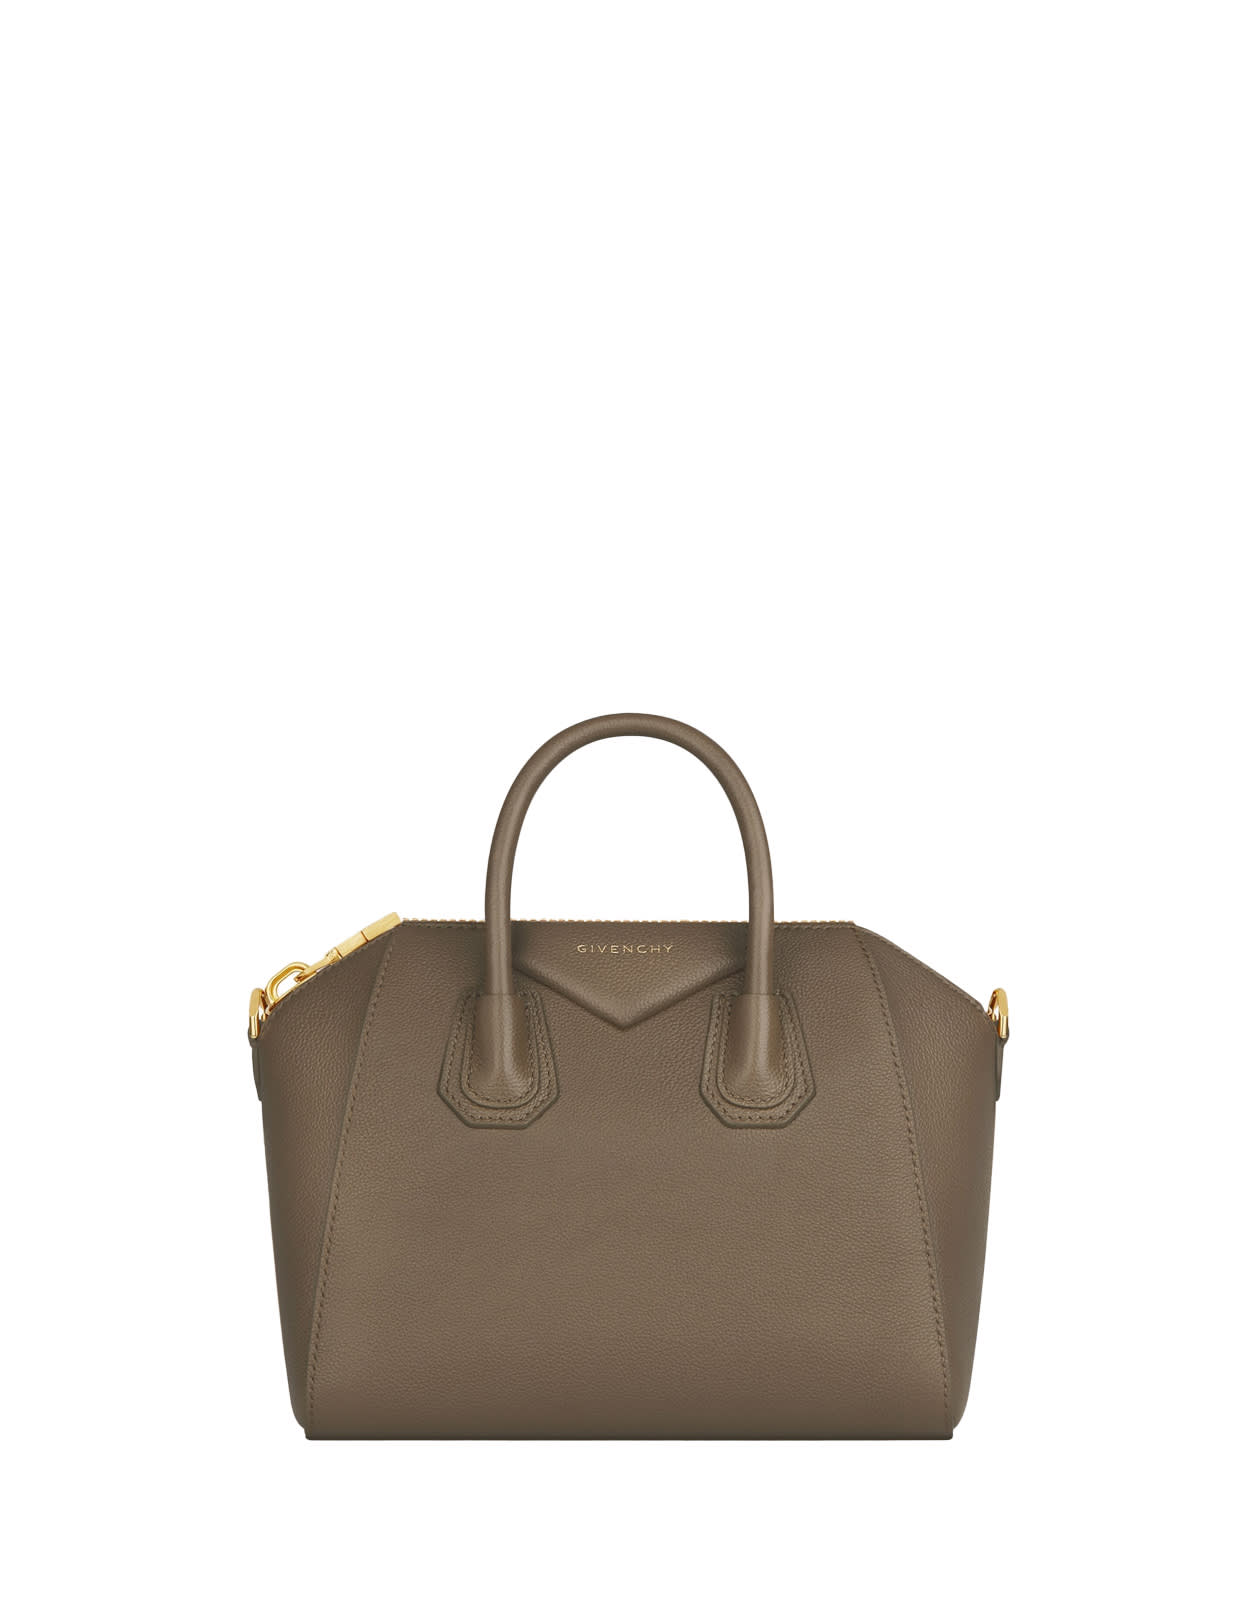 GIVENCHY ANTIGONA SMALL BAG IN TAUPE FULL GRAIN LEATHER